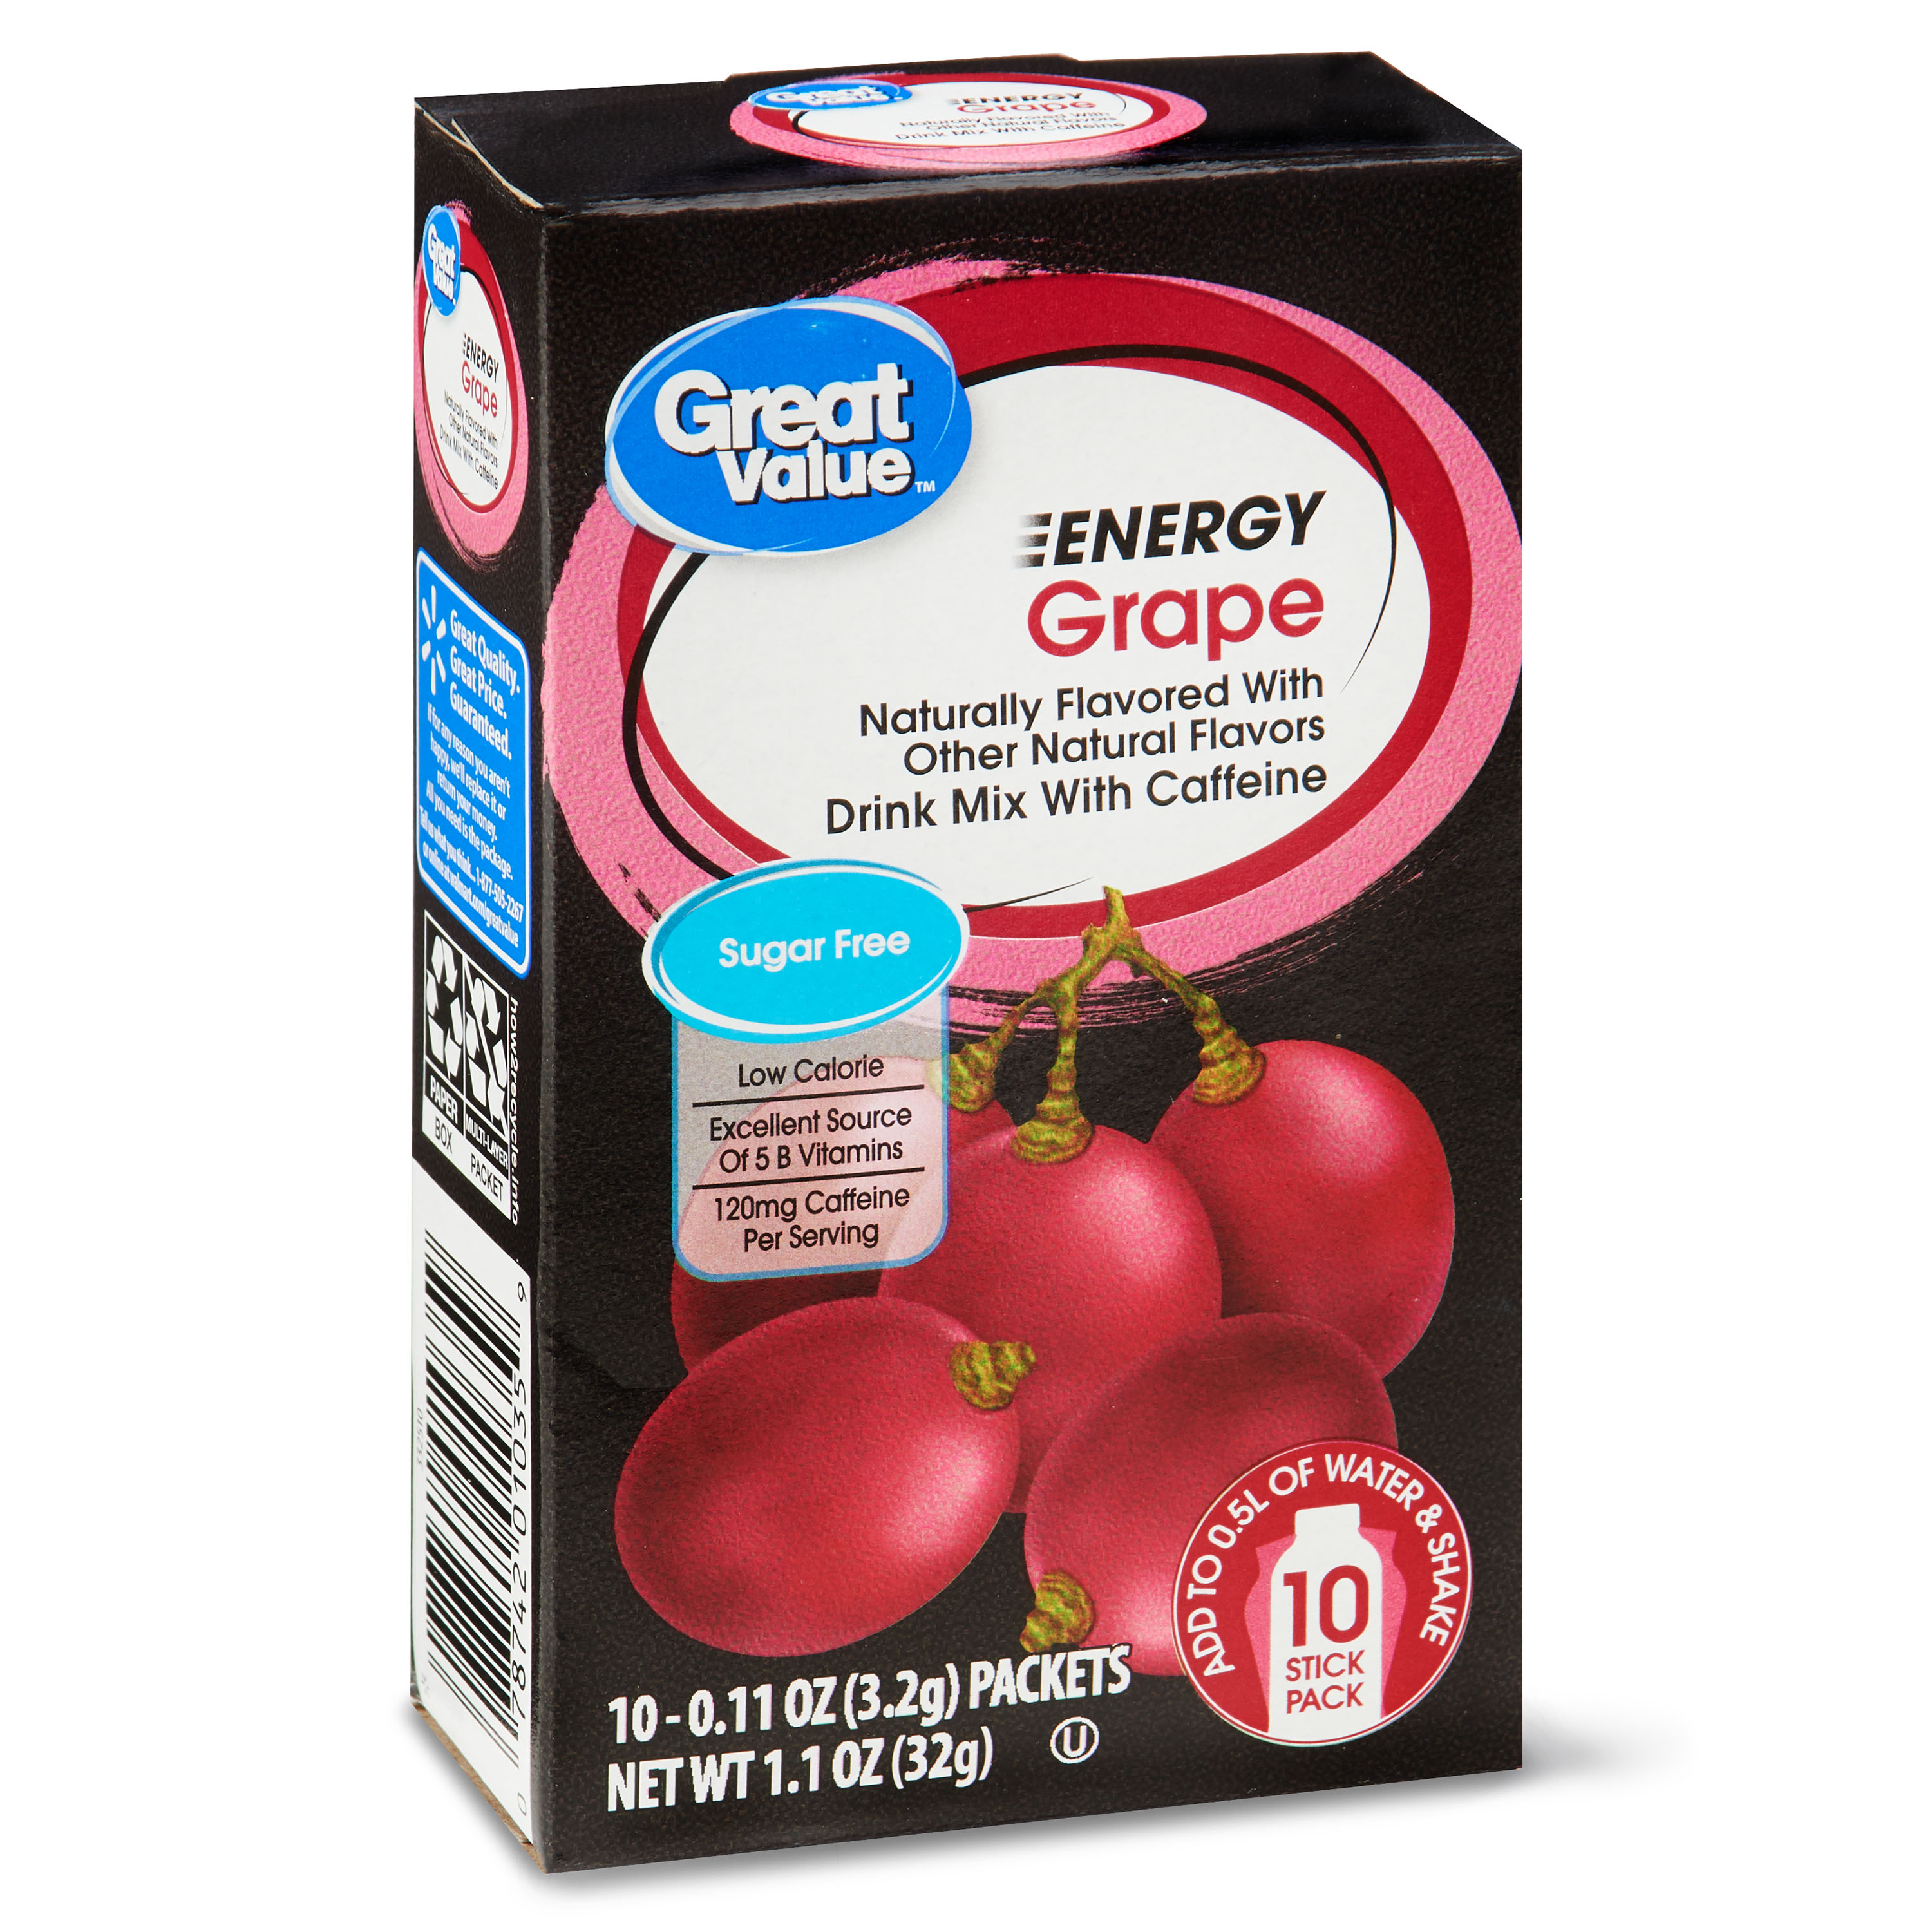 (4 Pack) Great Value Energy Drink Mix, Grape, Sugar-Free, 1.1 Oz, 10 Count Image